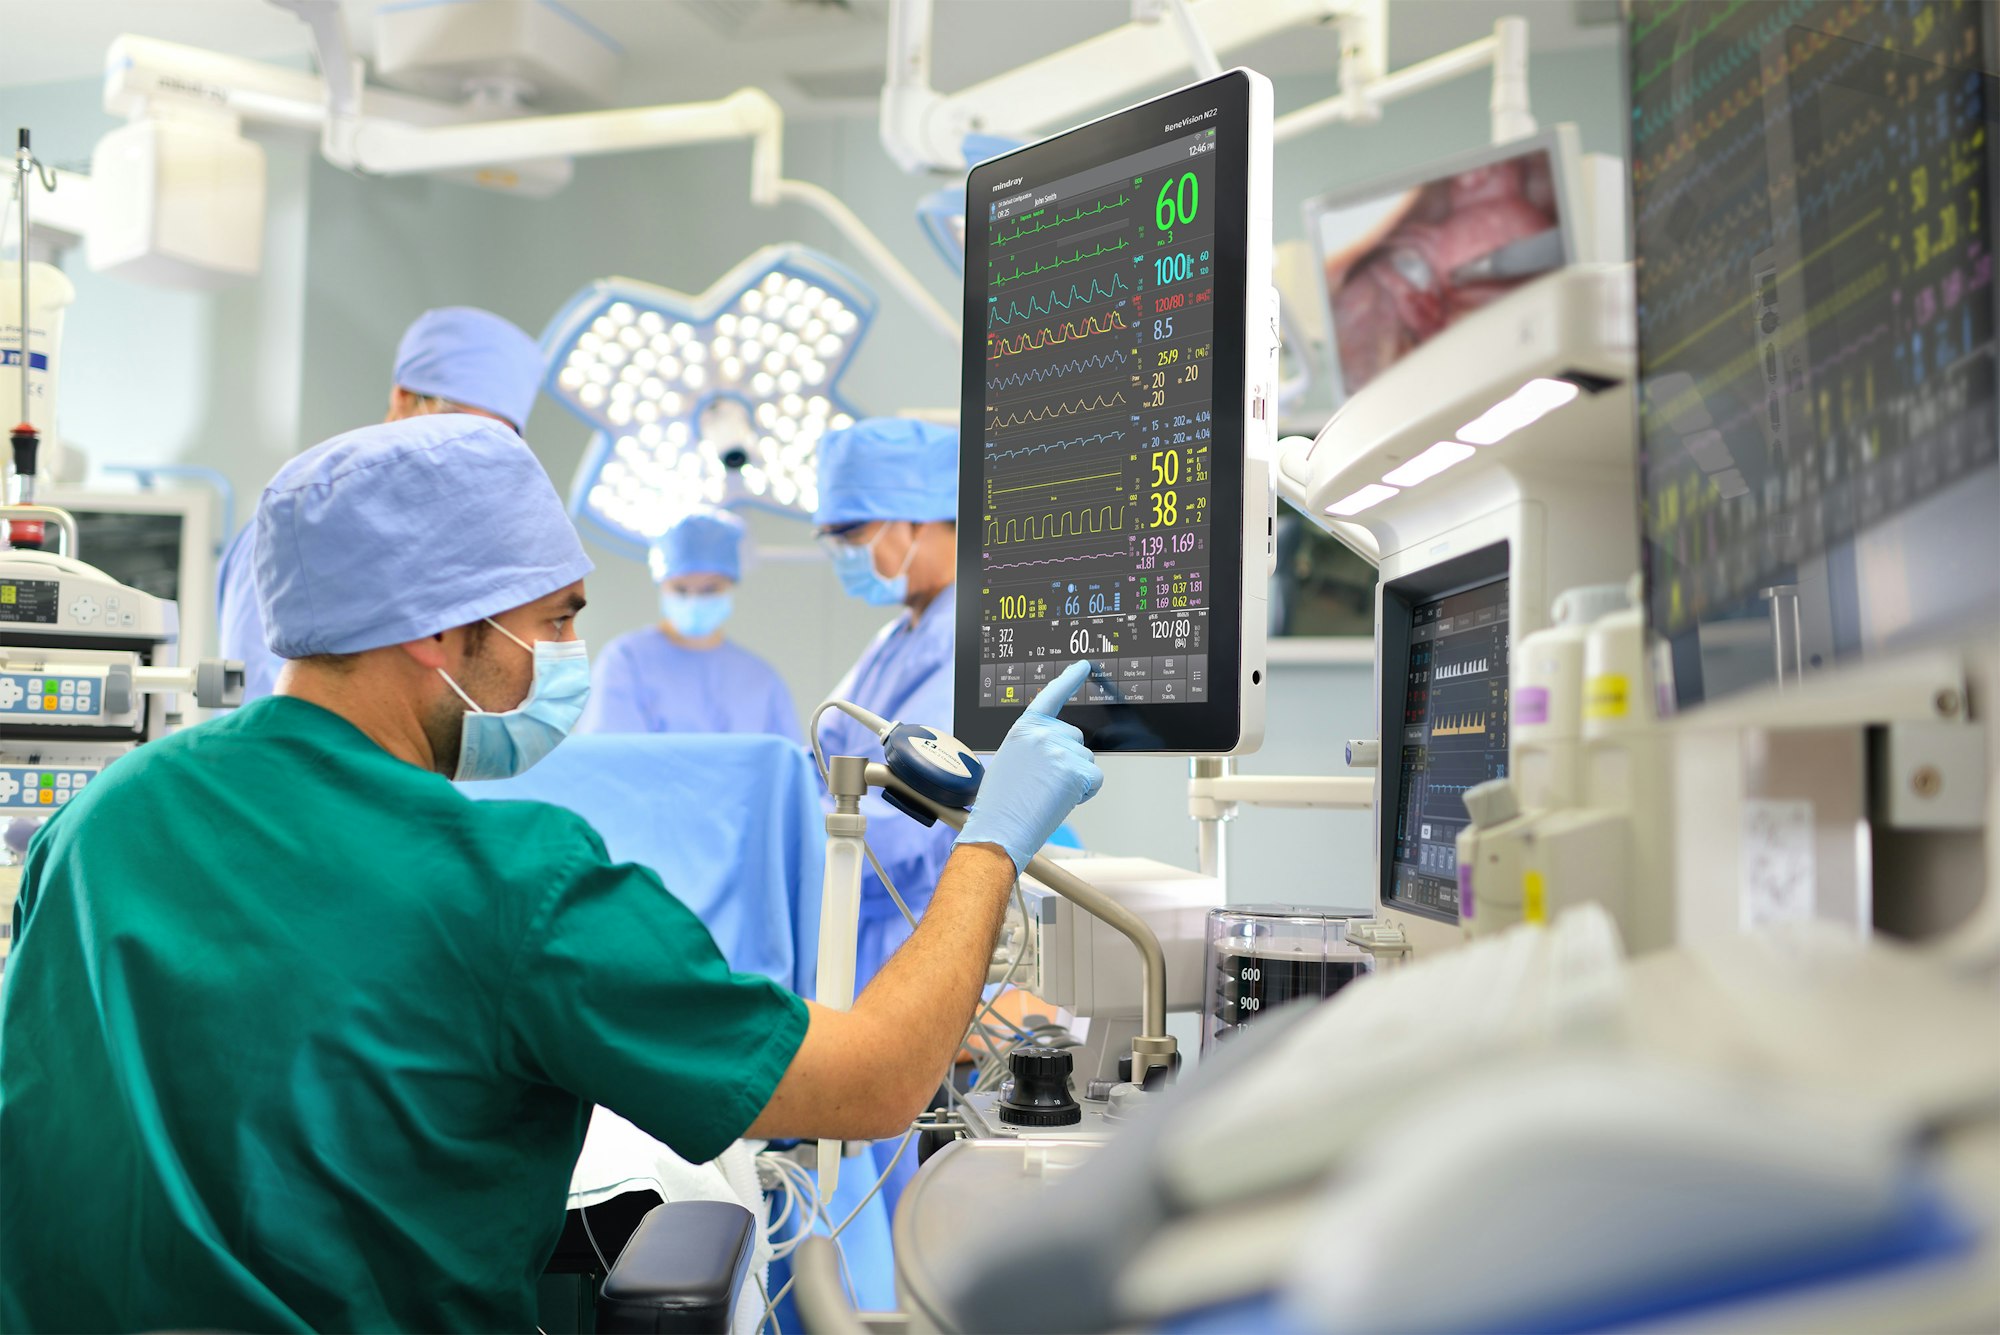 Israel's leading hospital joins forces with AI-powered surgical performance educator